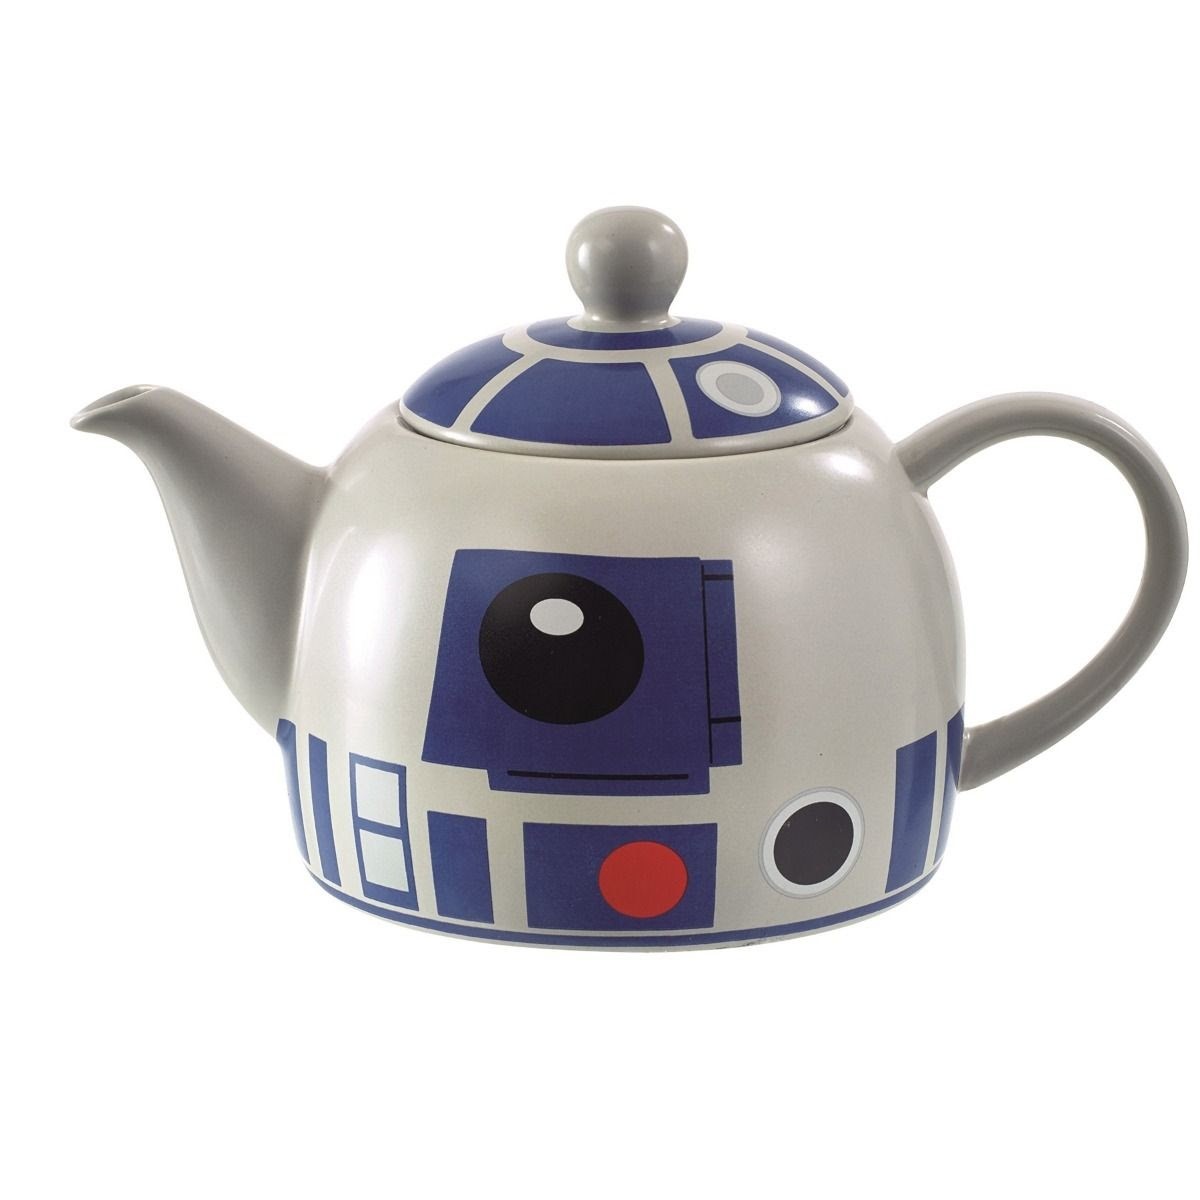 Embrace your friend's inner geek with this R2D2 teapot